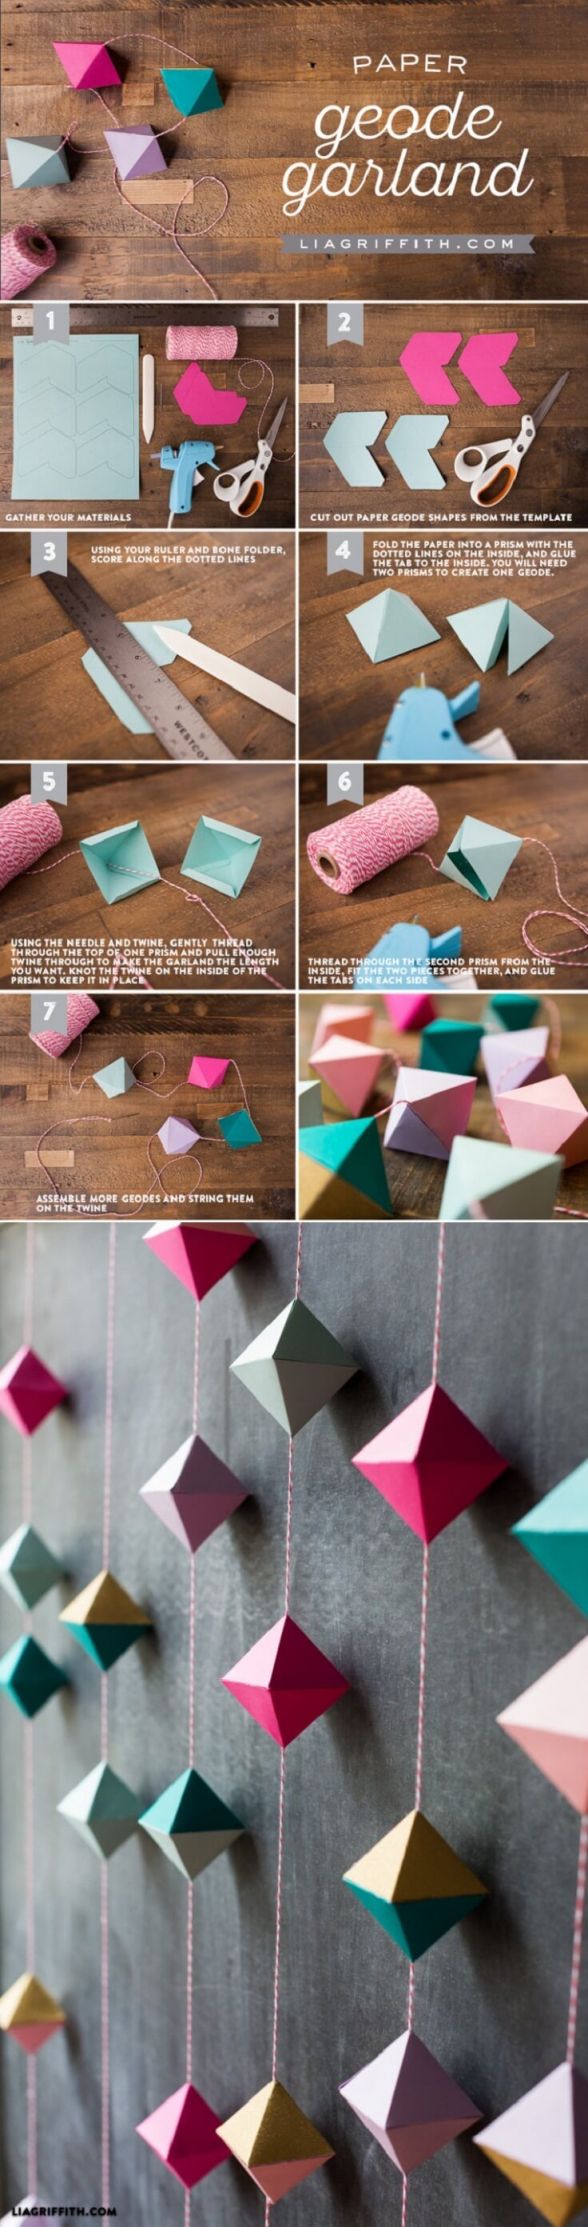 Best Diy Crafts Ideas For Home